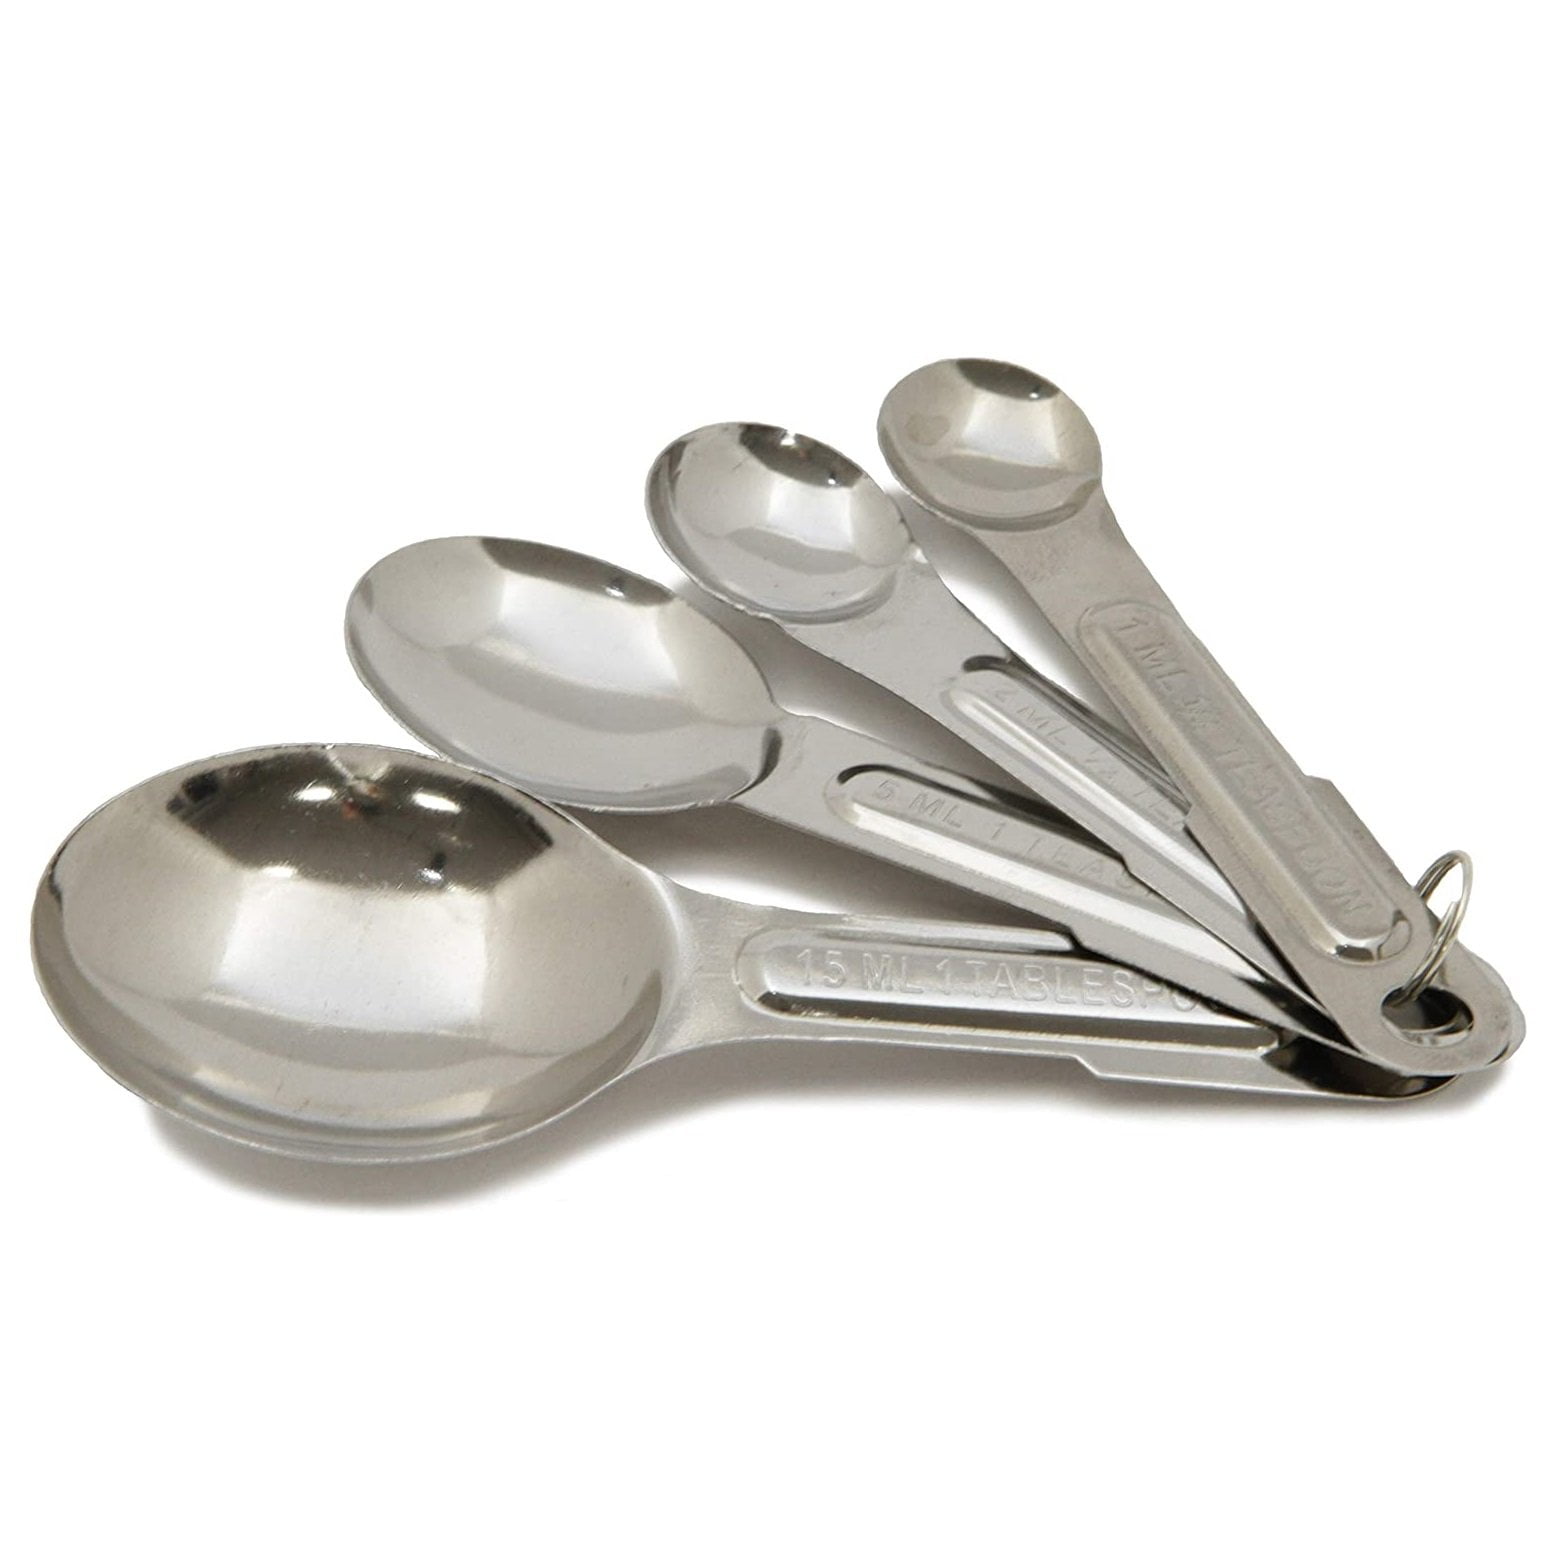 Set of 4 Stainless Steel Nesting Measuring Spoons w/Ring Y.H. 1/4 1/2 1tsp  1T